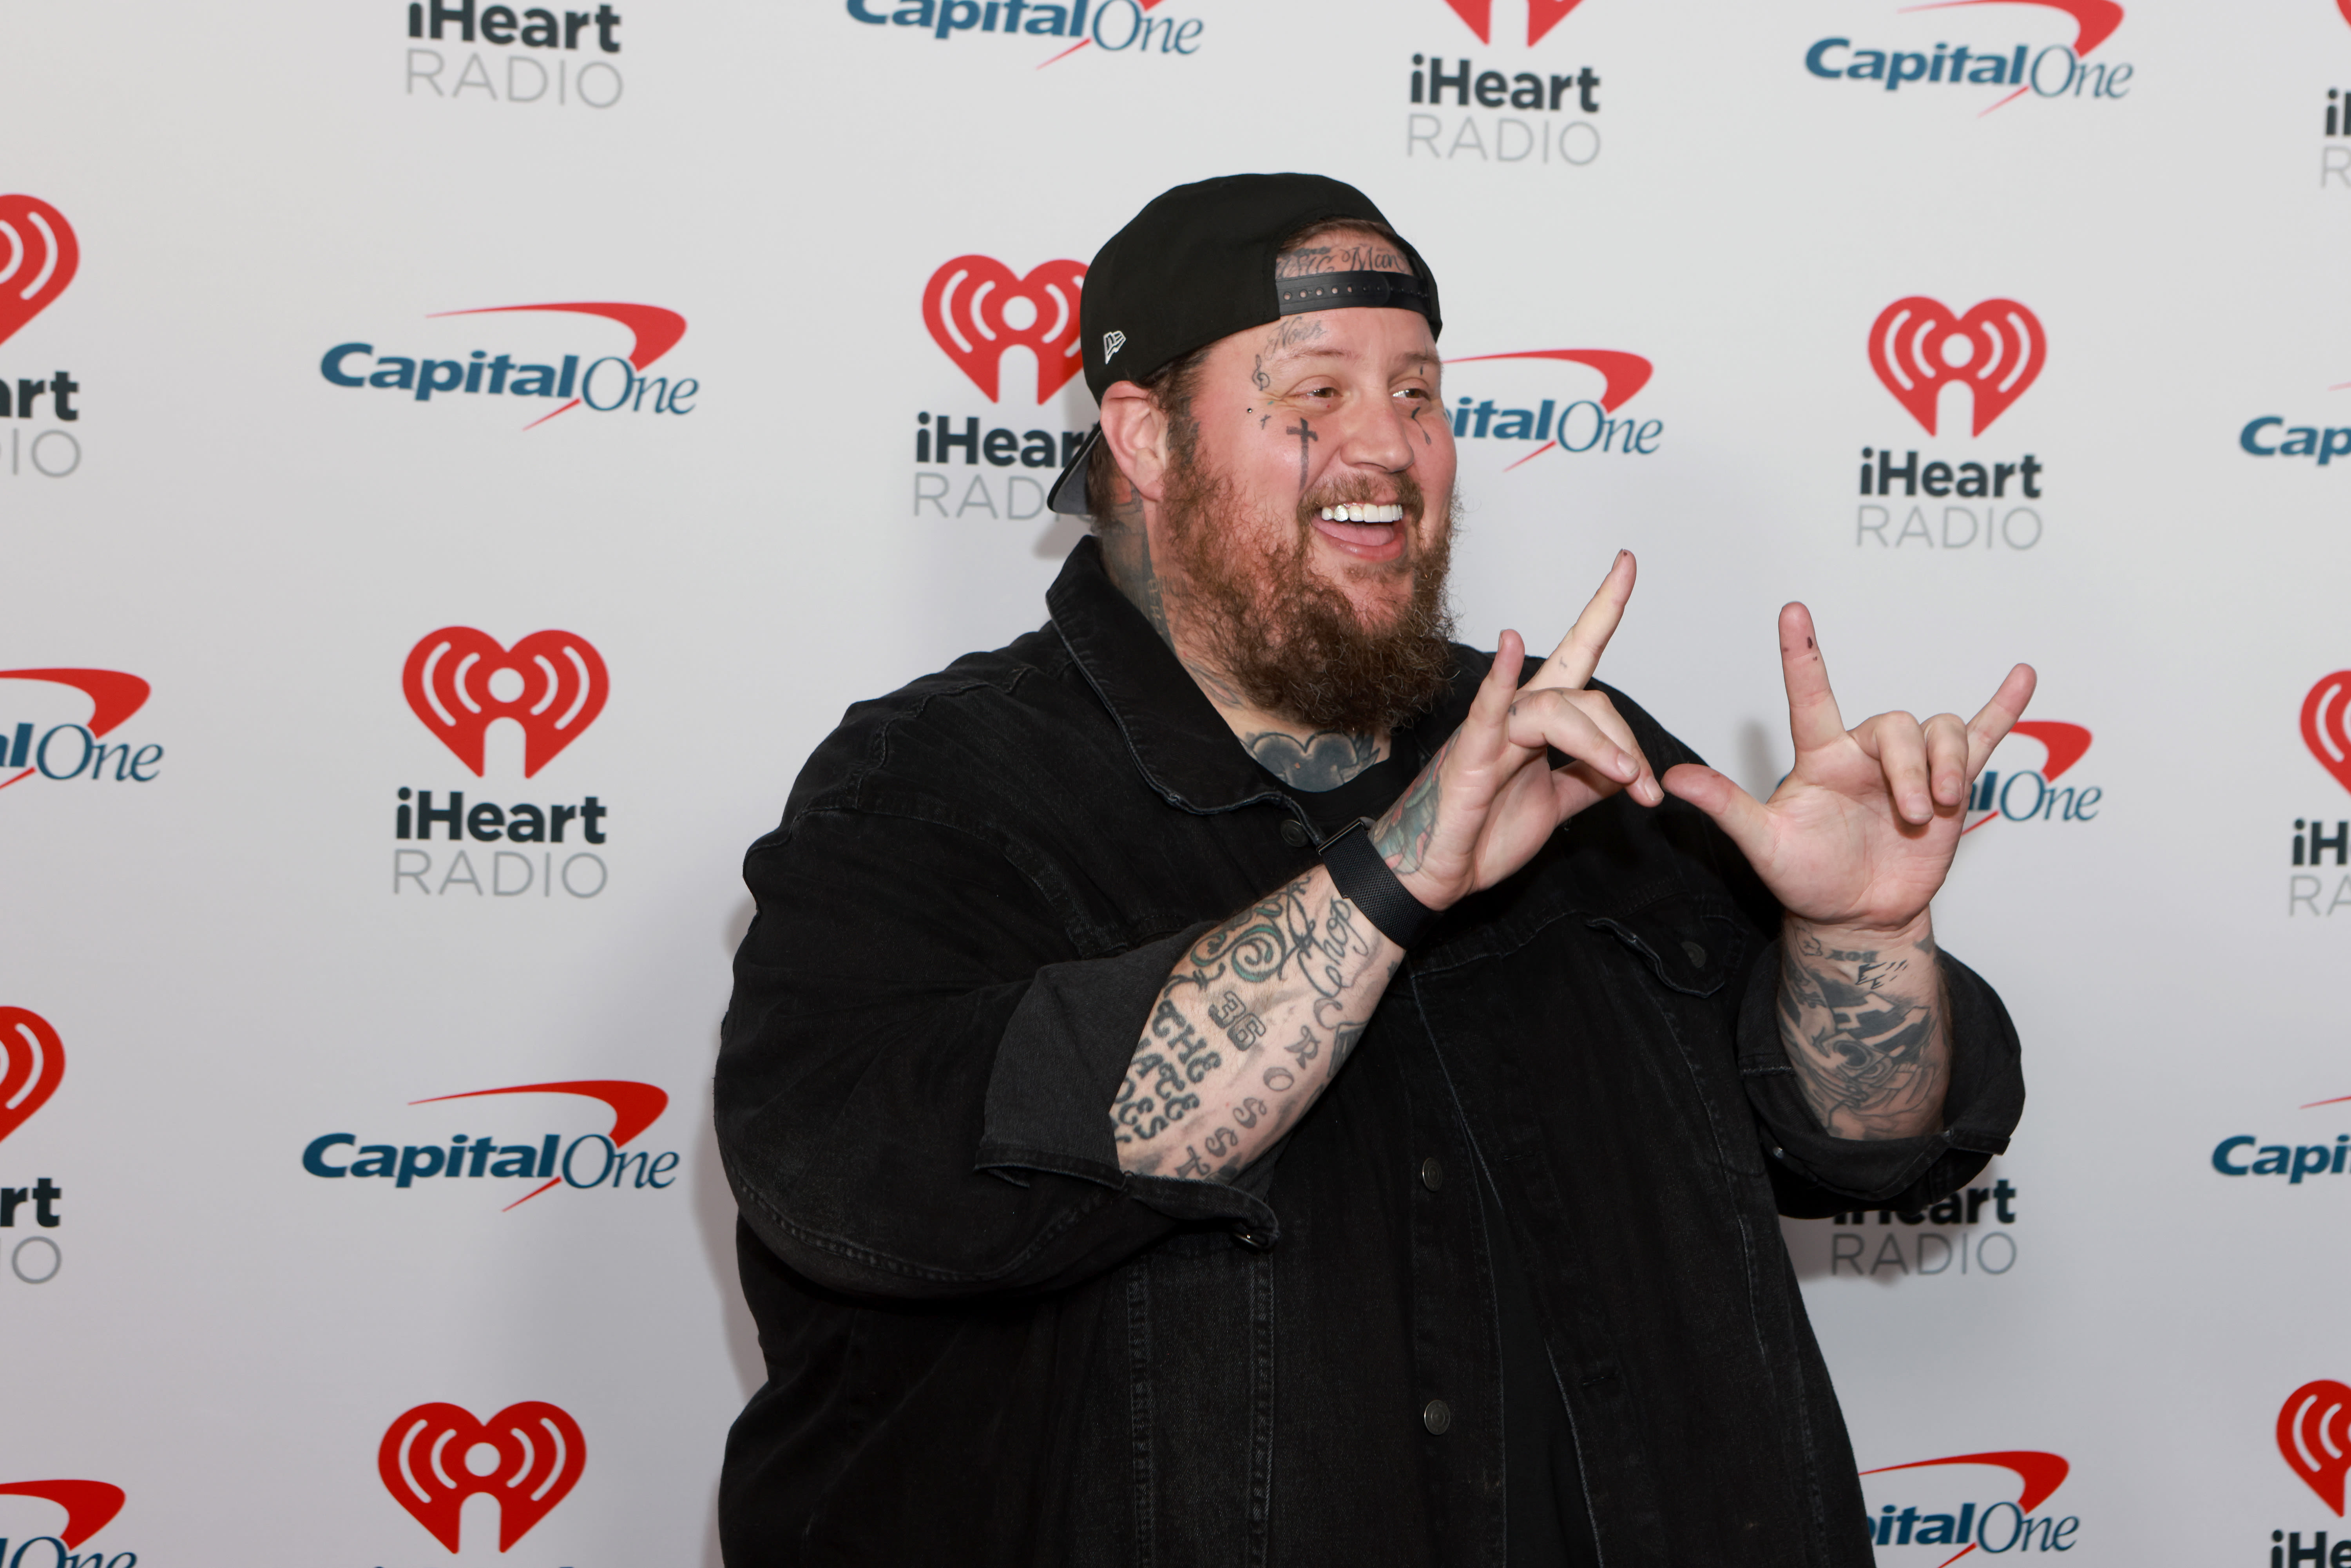 Jelly Roll Reveals the 2 Percent of His Tattoos He Doesn’t Regret: I’d Get ‘Rid of Every Other Tattoo’